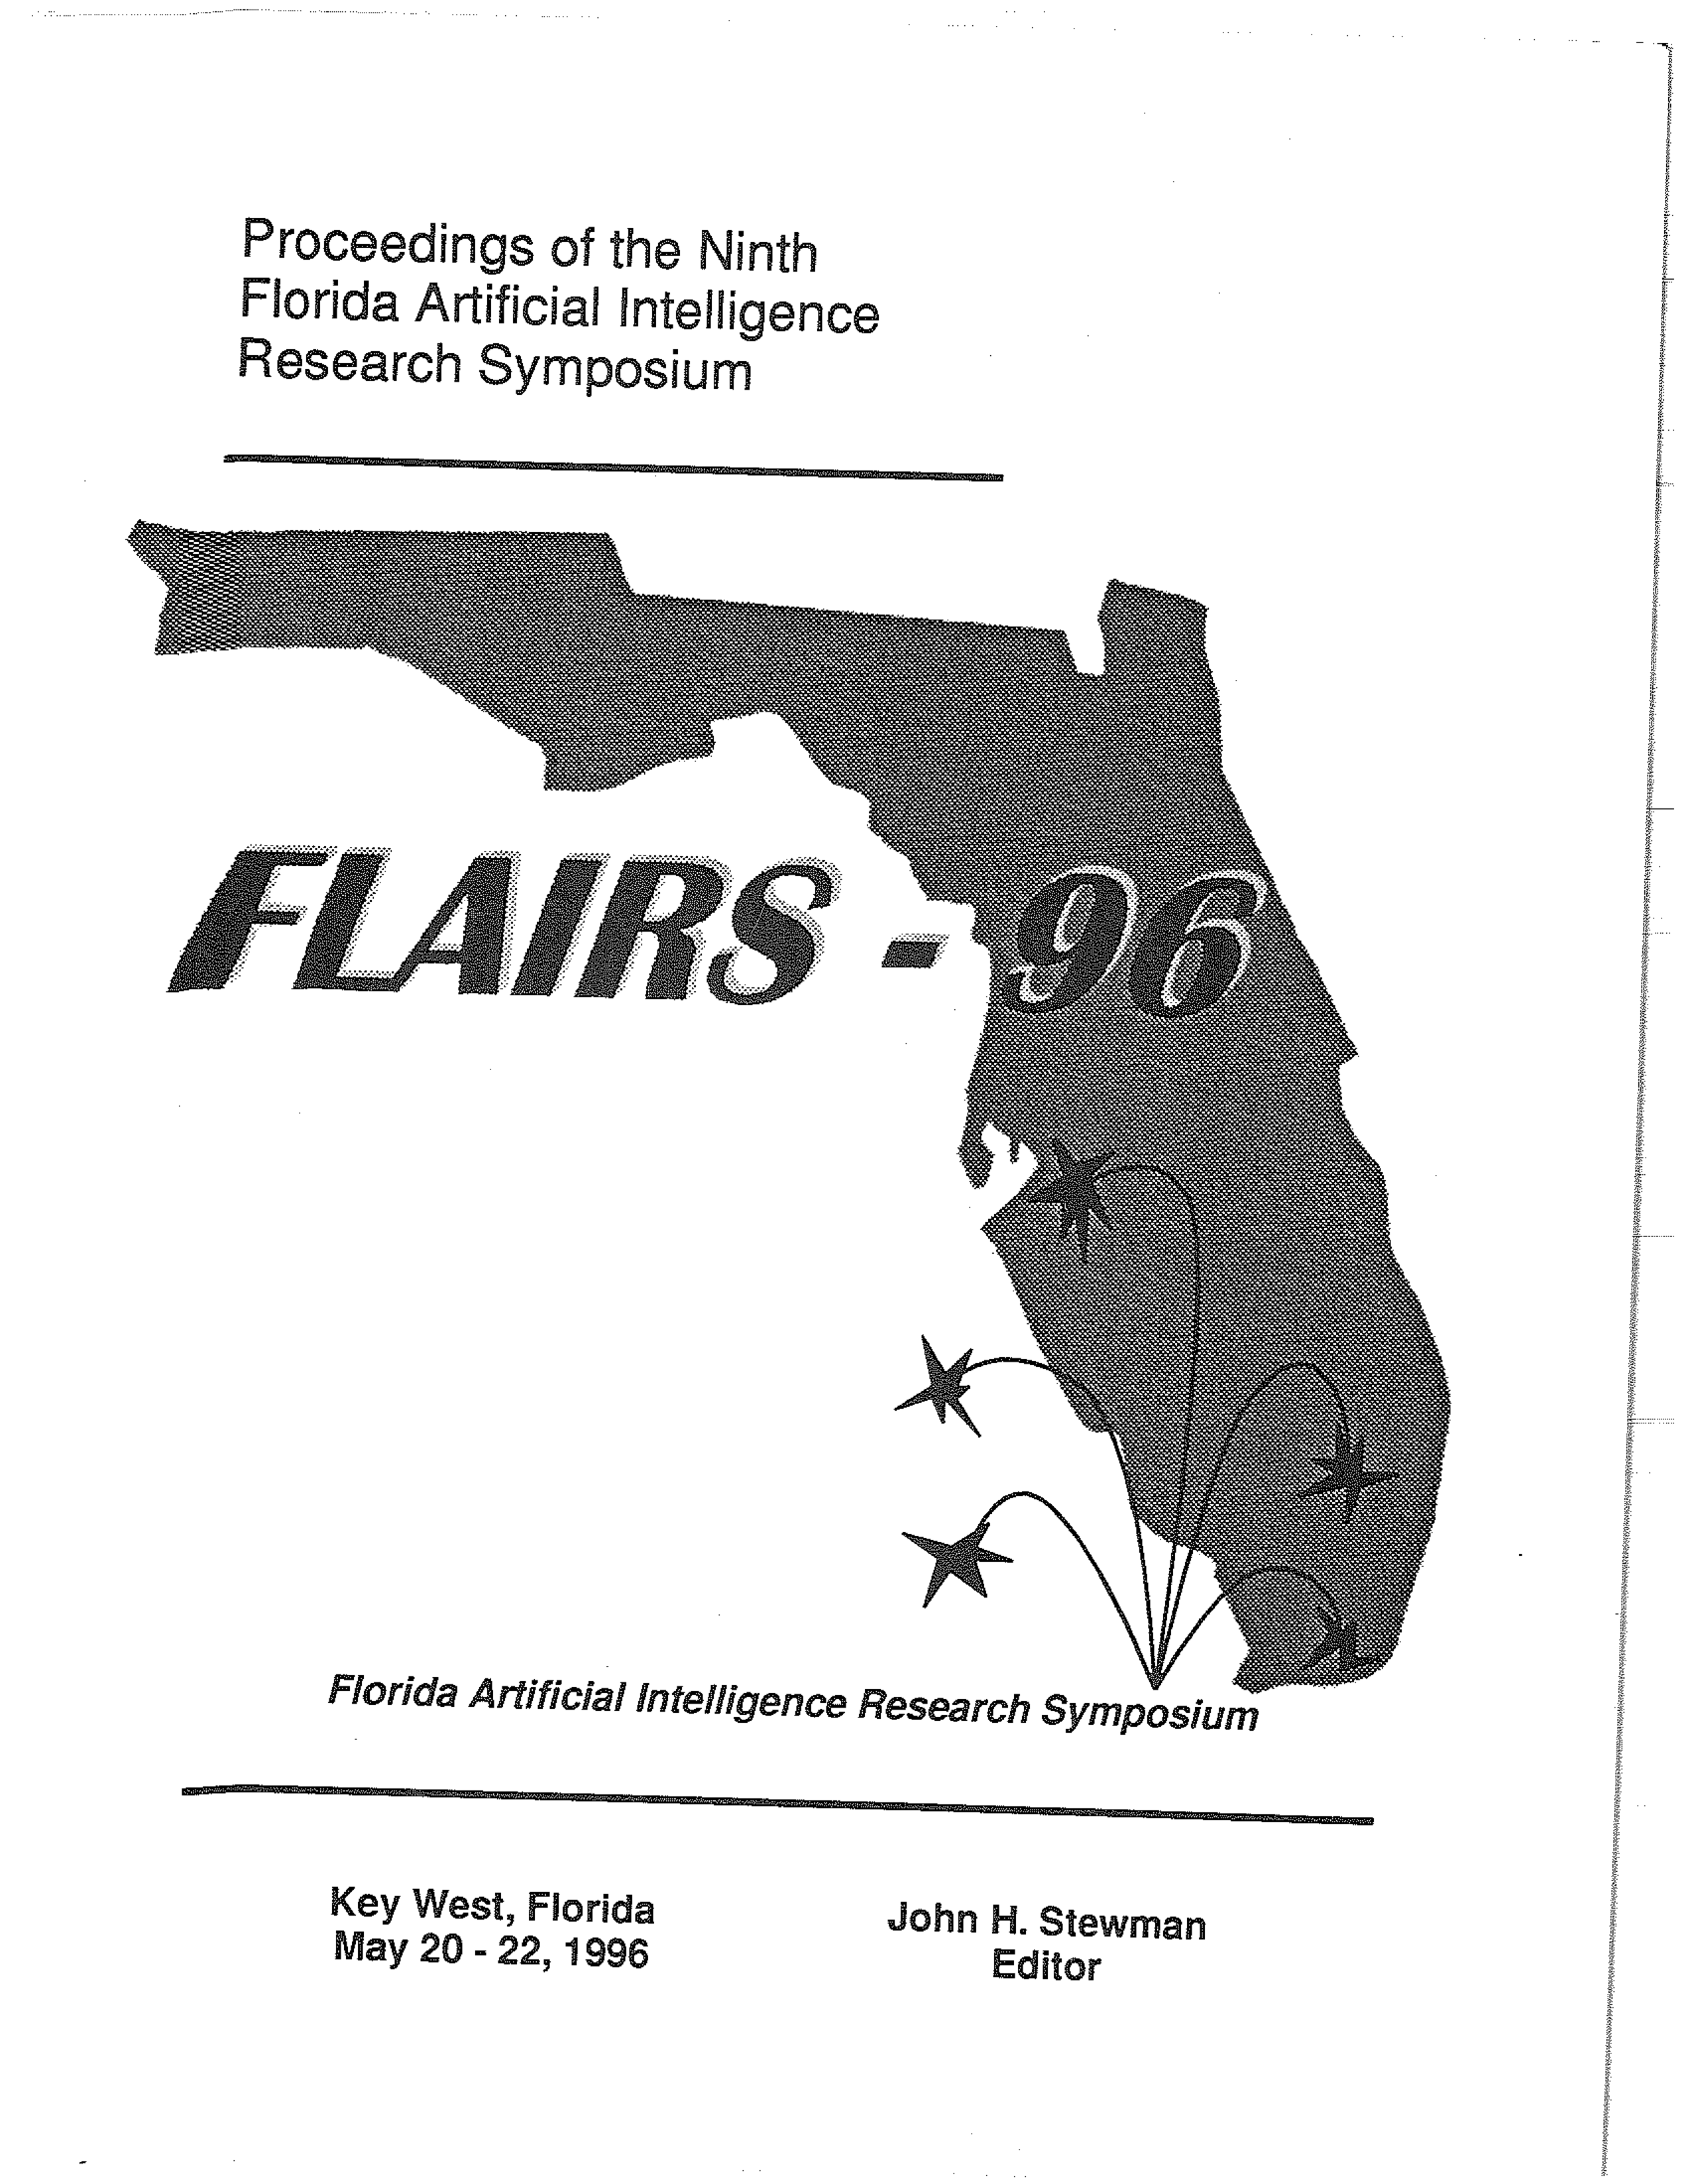 Proceedings of FLAIRS-9, cover